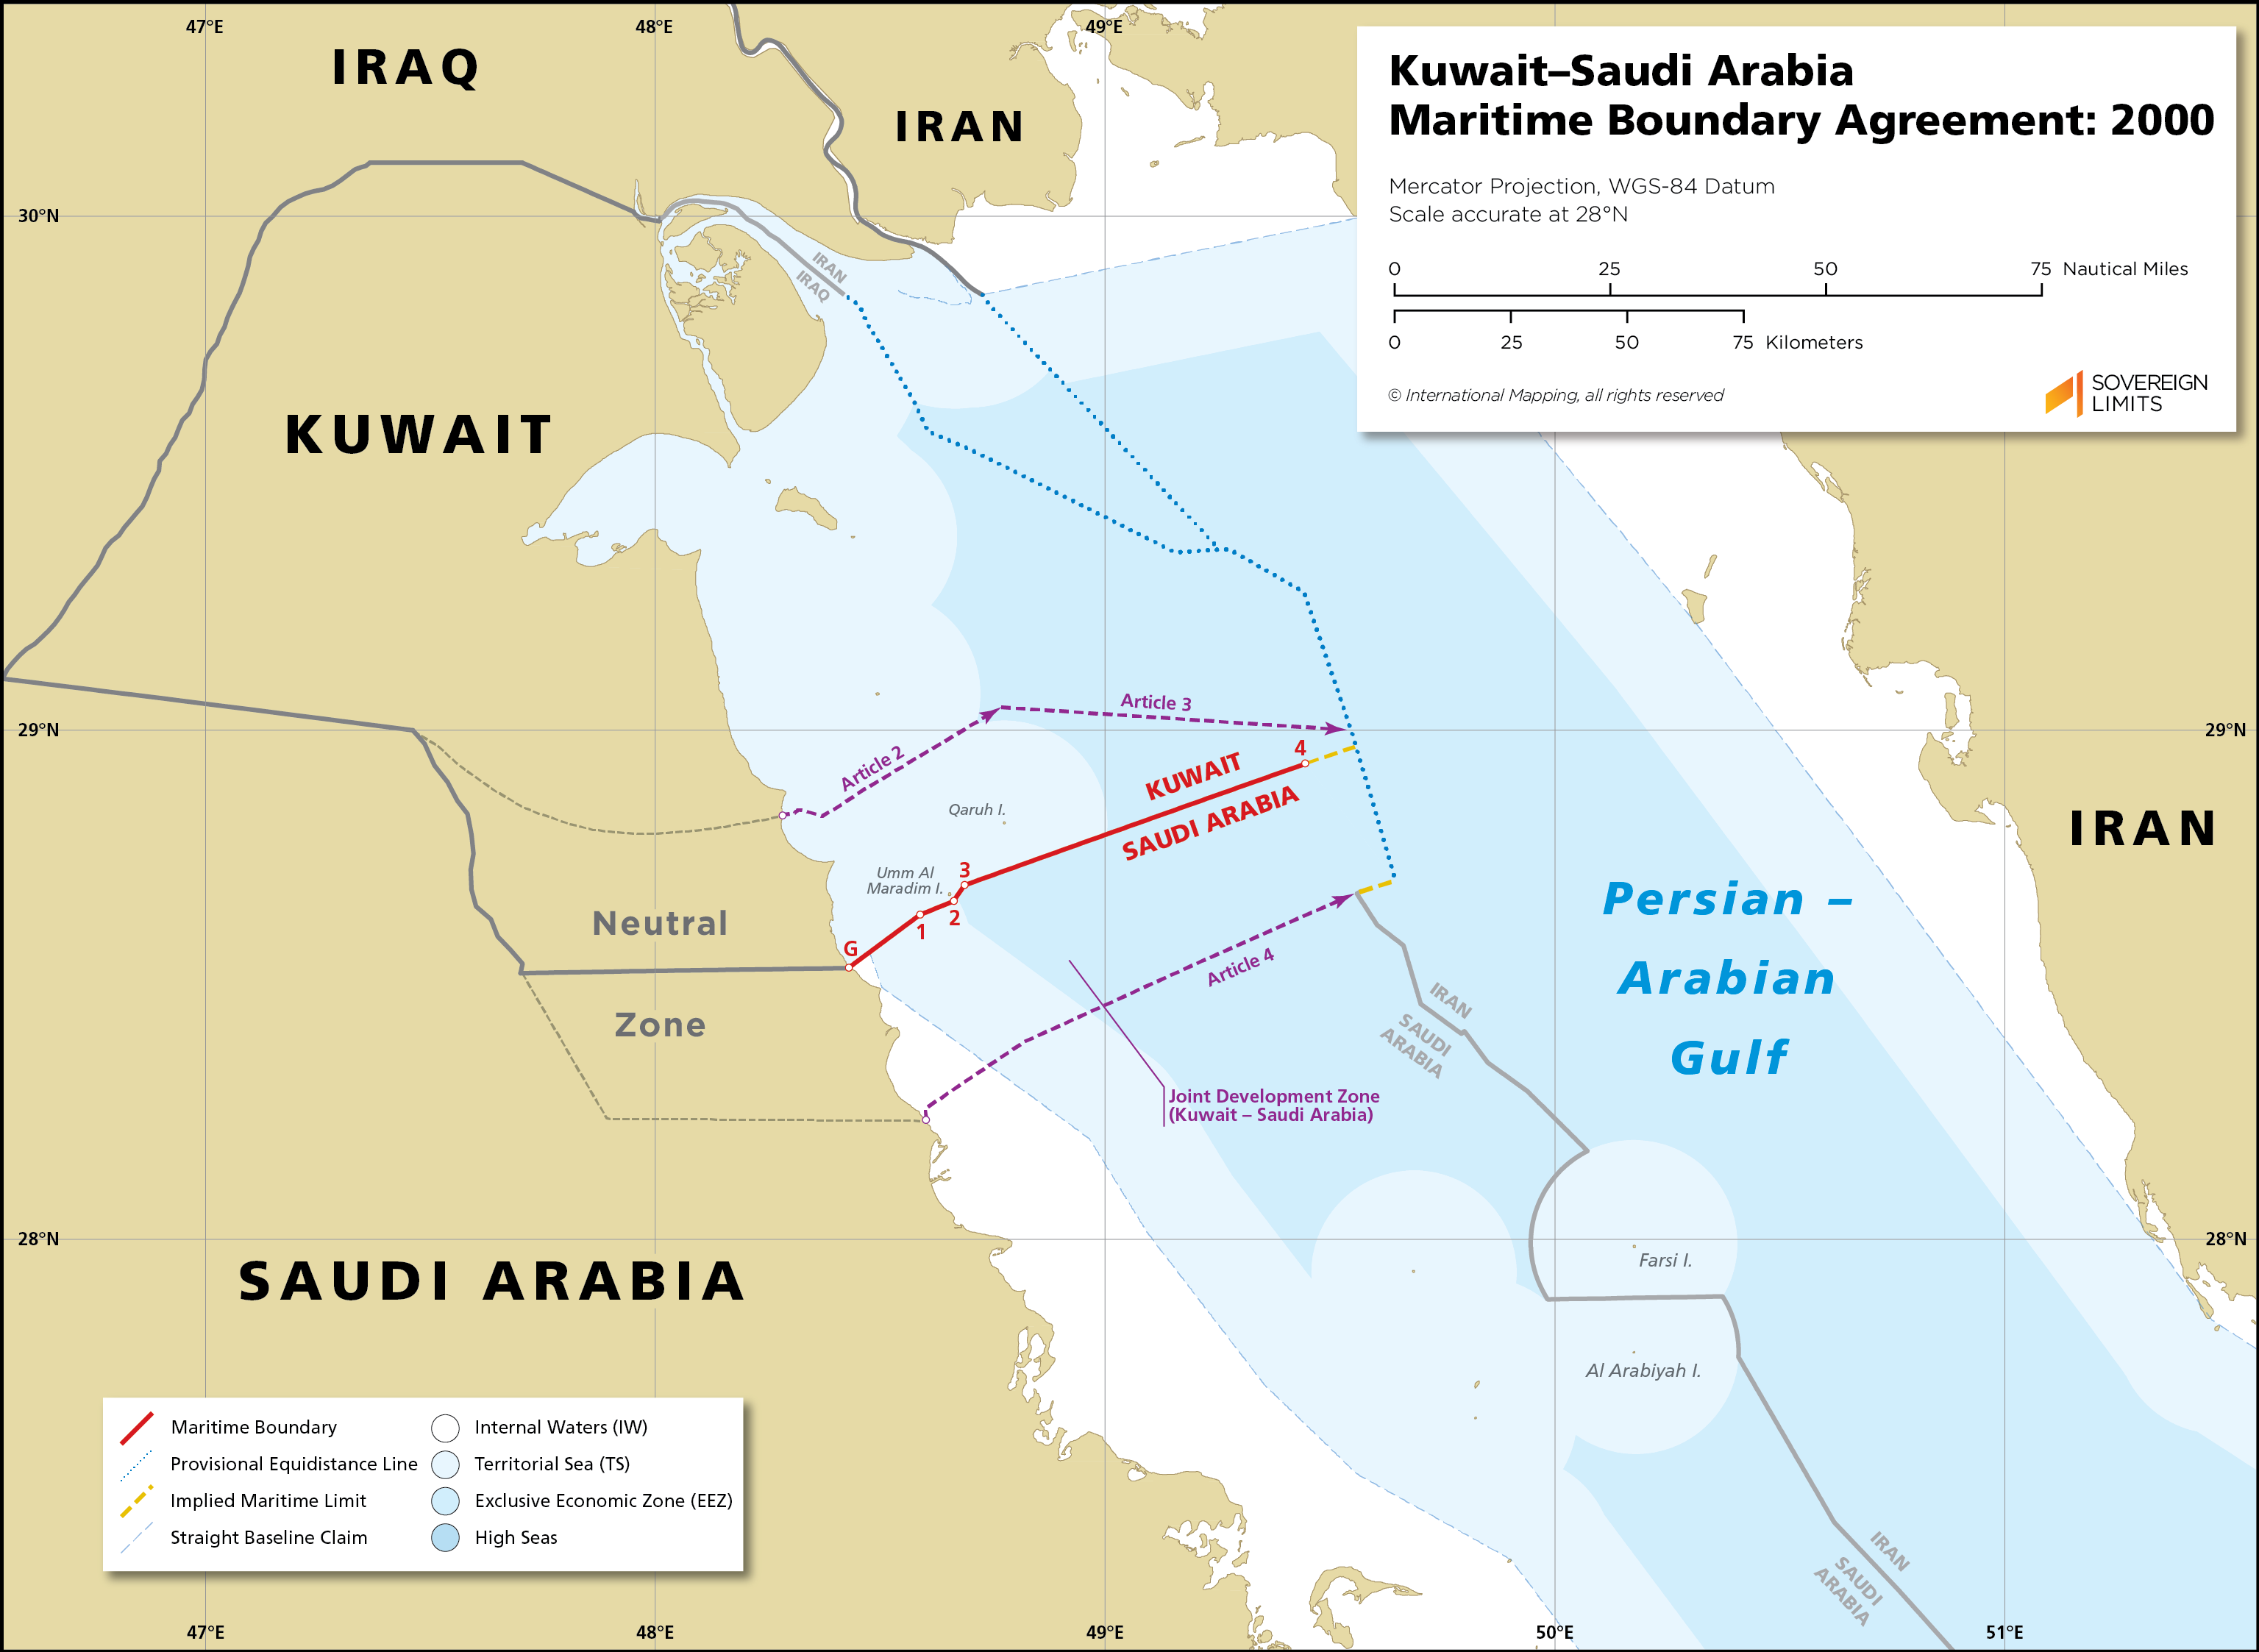 Kuwait maritime claims about baseline, territorial sea, exclusive economic zone and continental shelf